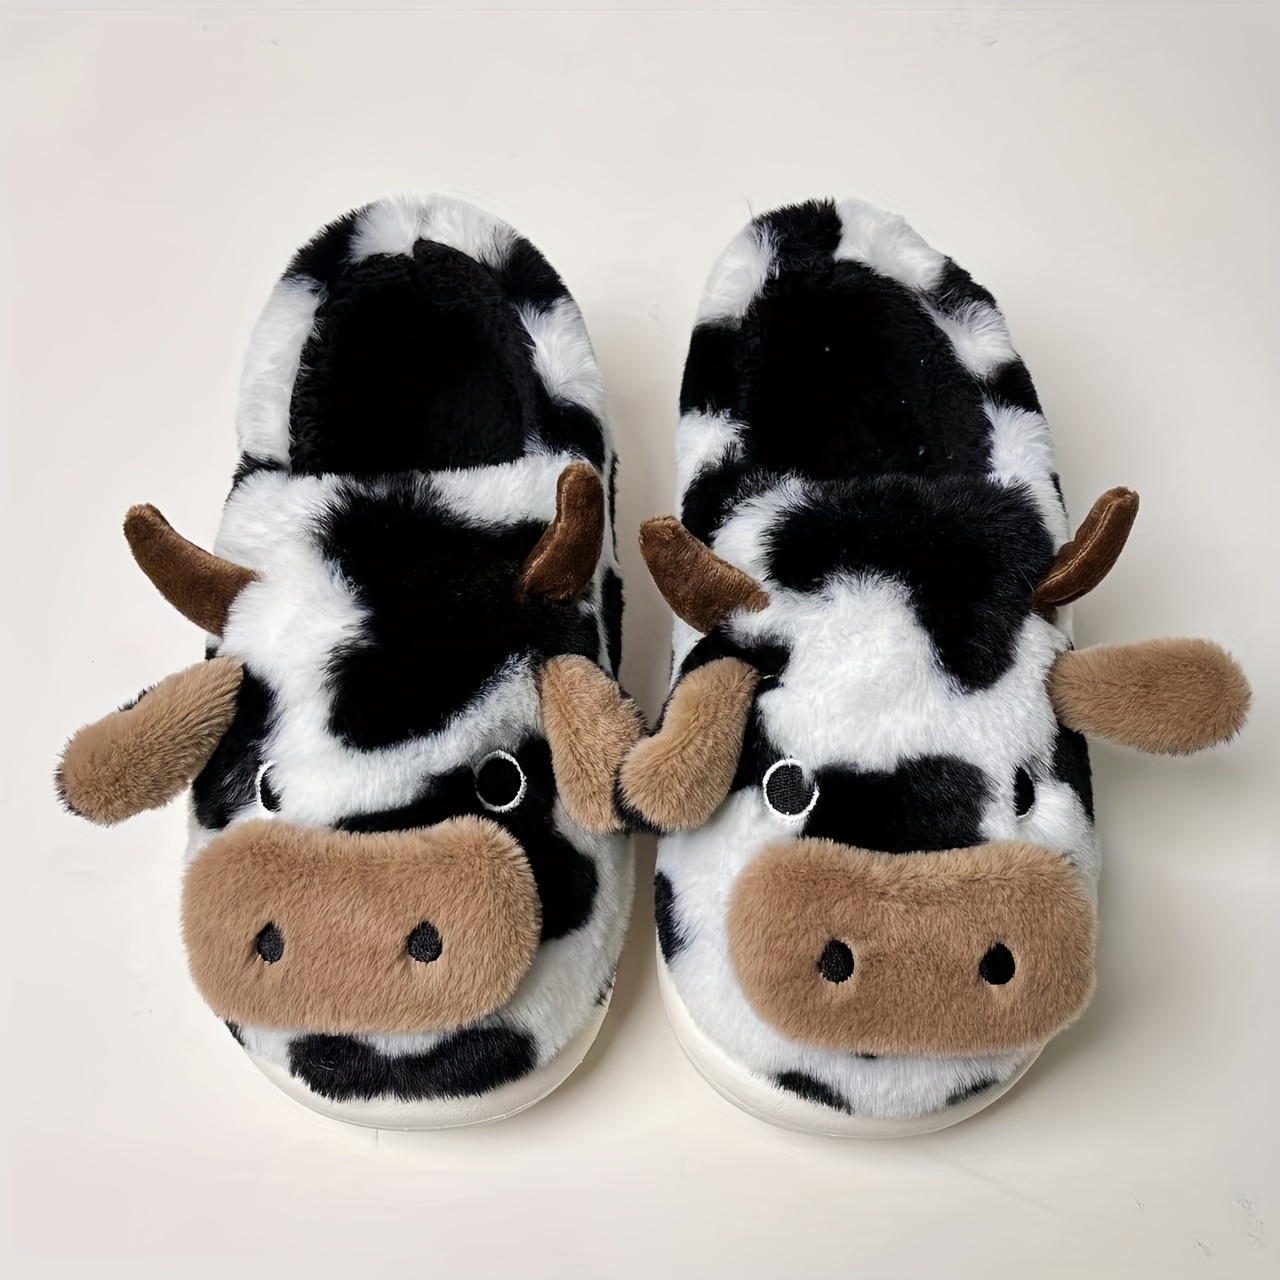 Cute Cow Slippers Plush Cozy House Slippers Anti Skid Slip On